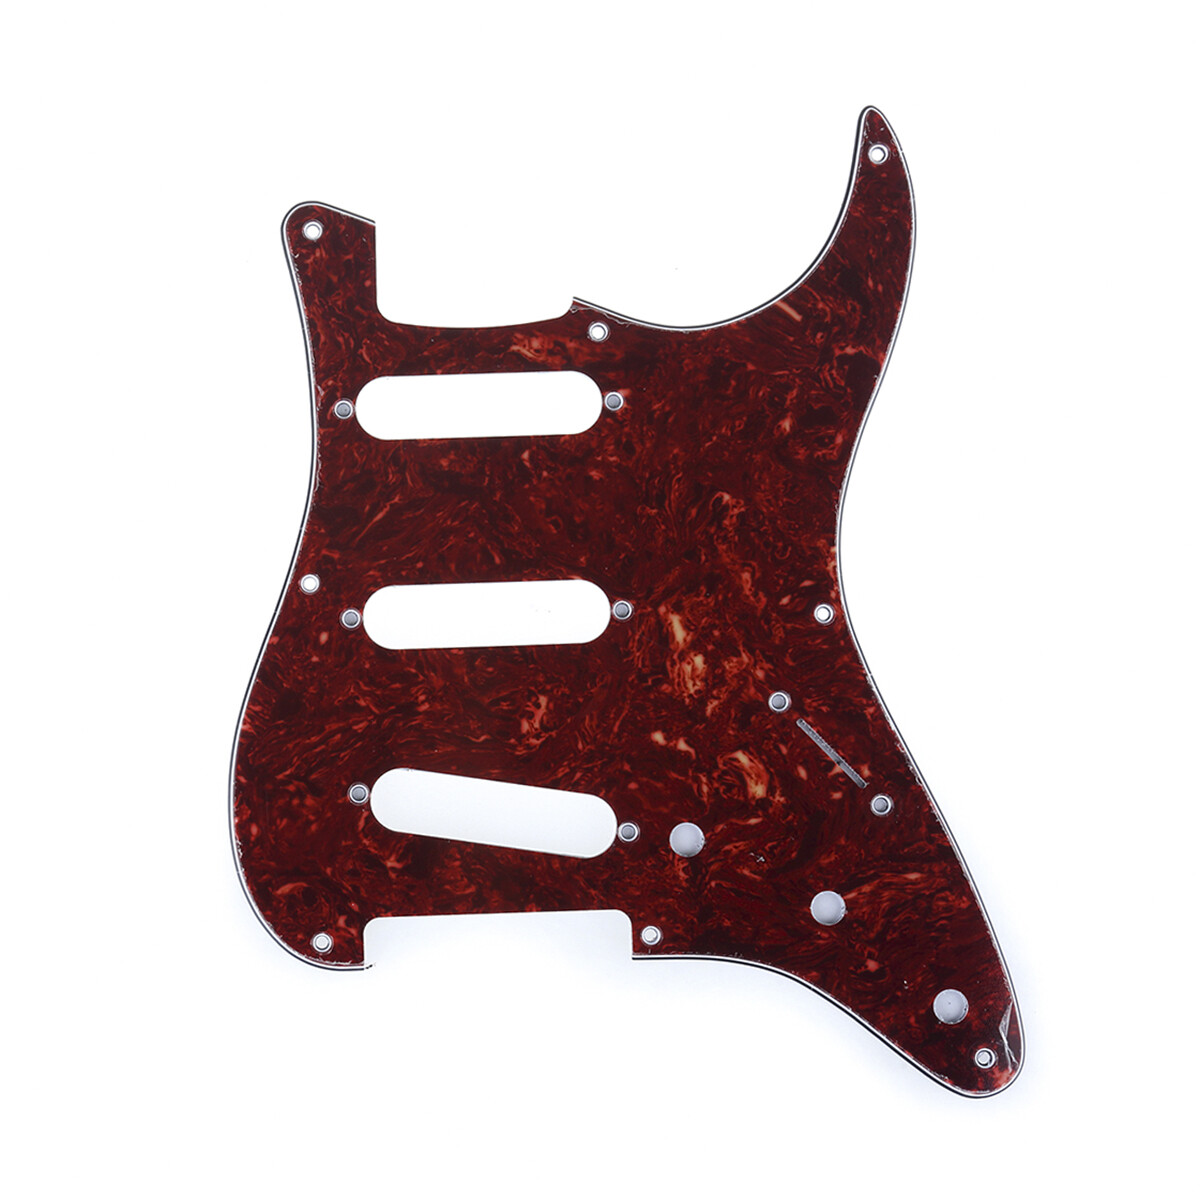 Brio 8-Hole 57 Vintage Style Strat SSS Pickguard for American Stratocaster, 4 ply Vintage Tortoise